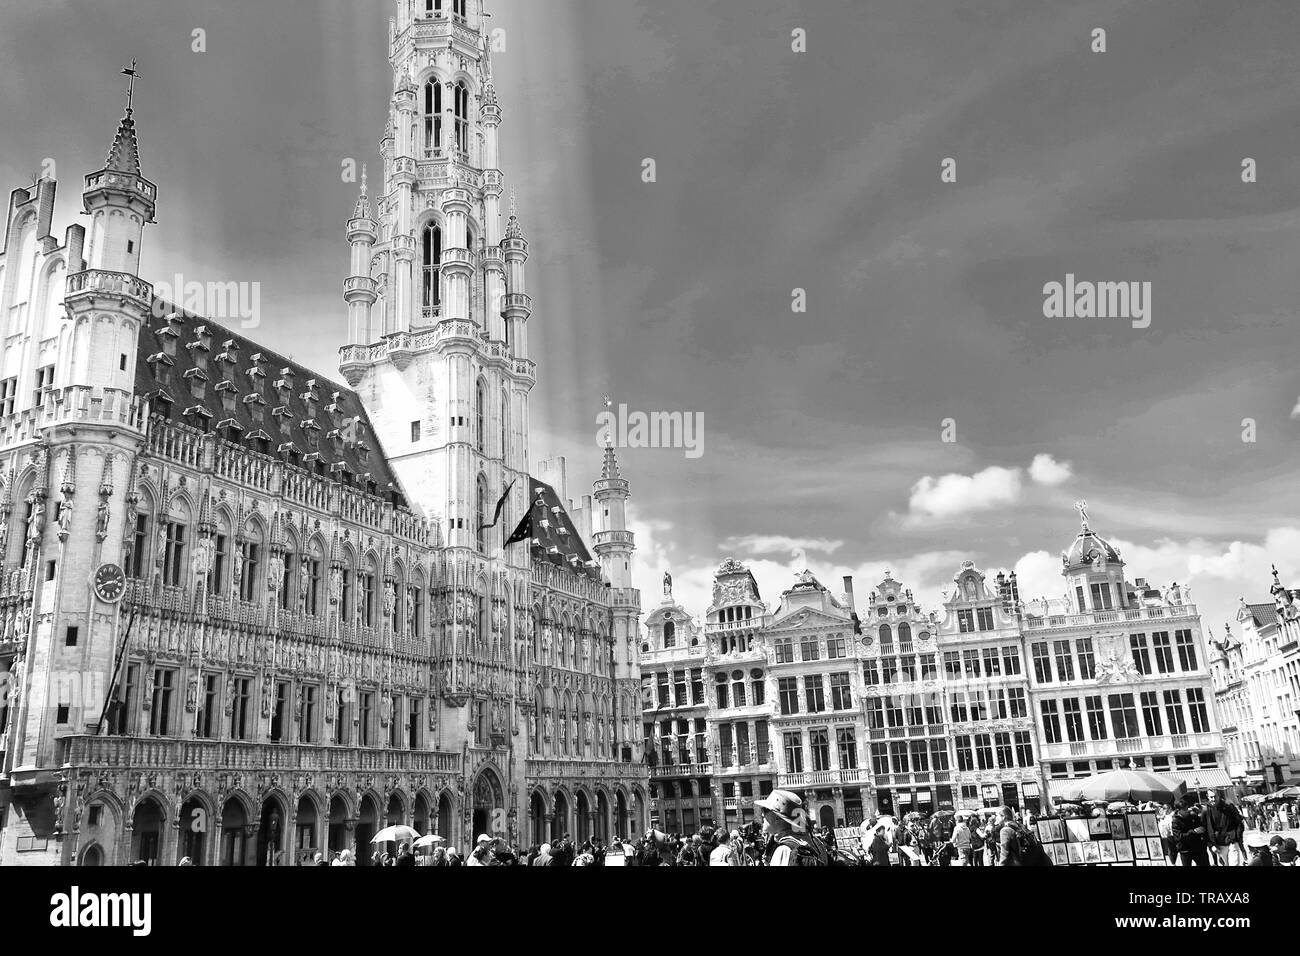 Brussels, Belgium - May 2019: The buildings of The Grand Place. Stock Photo